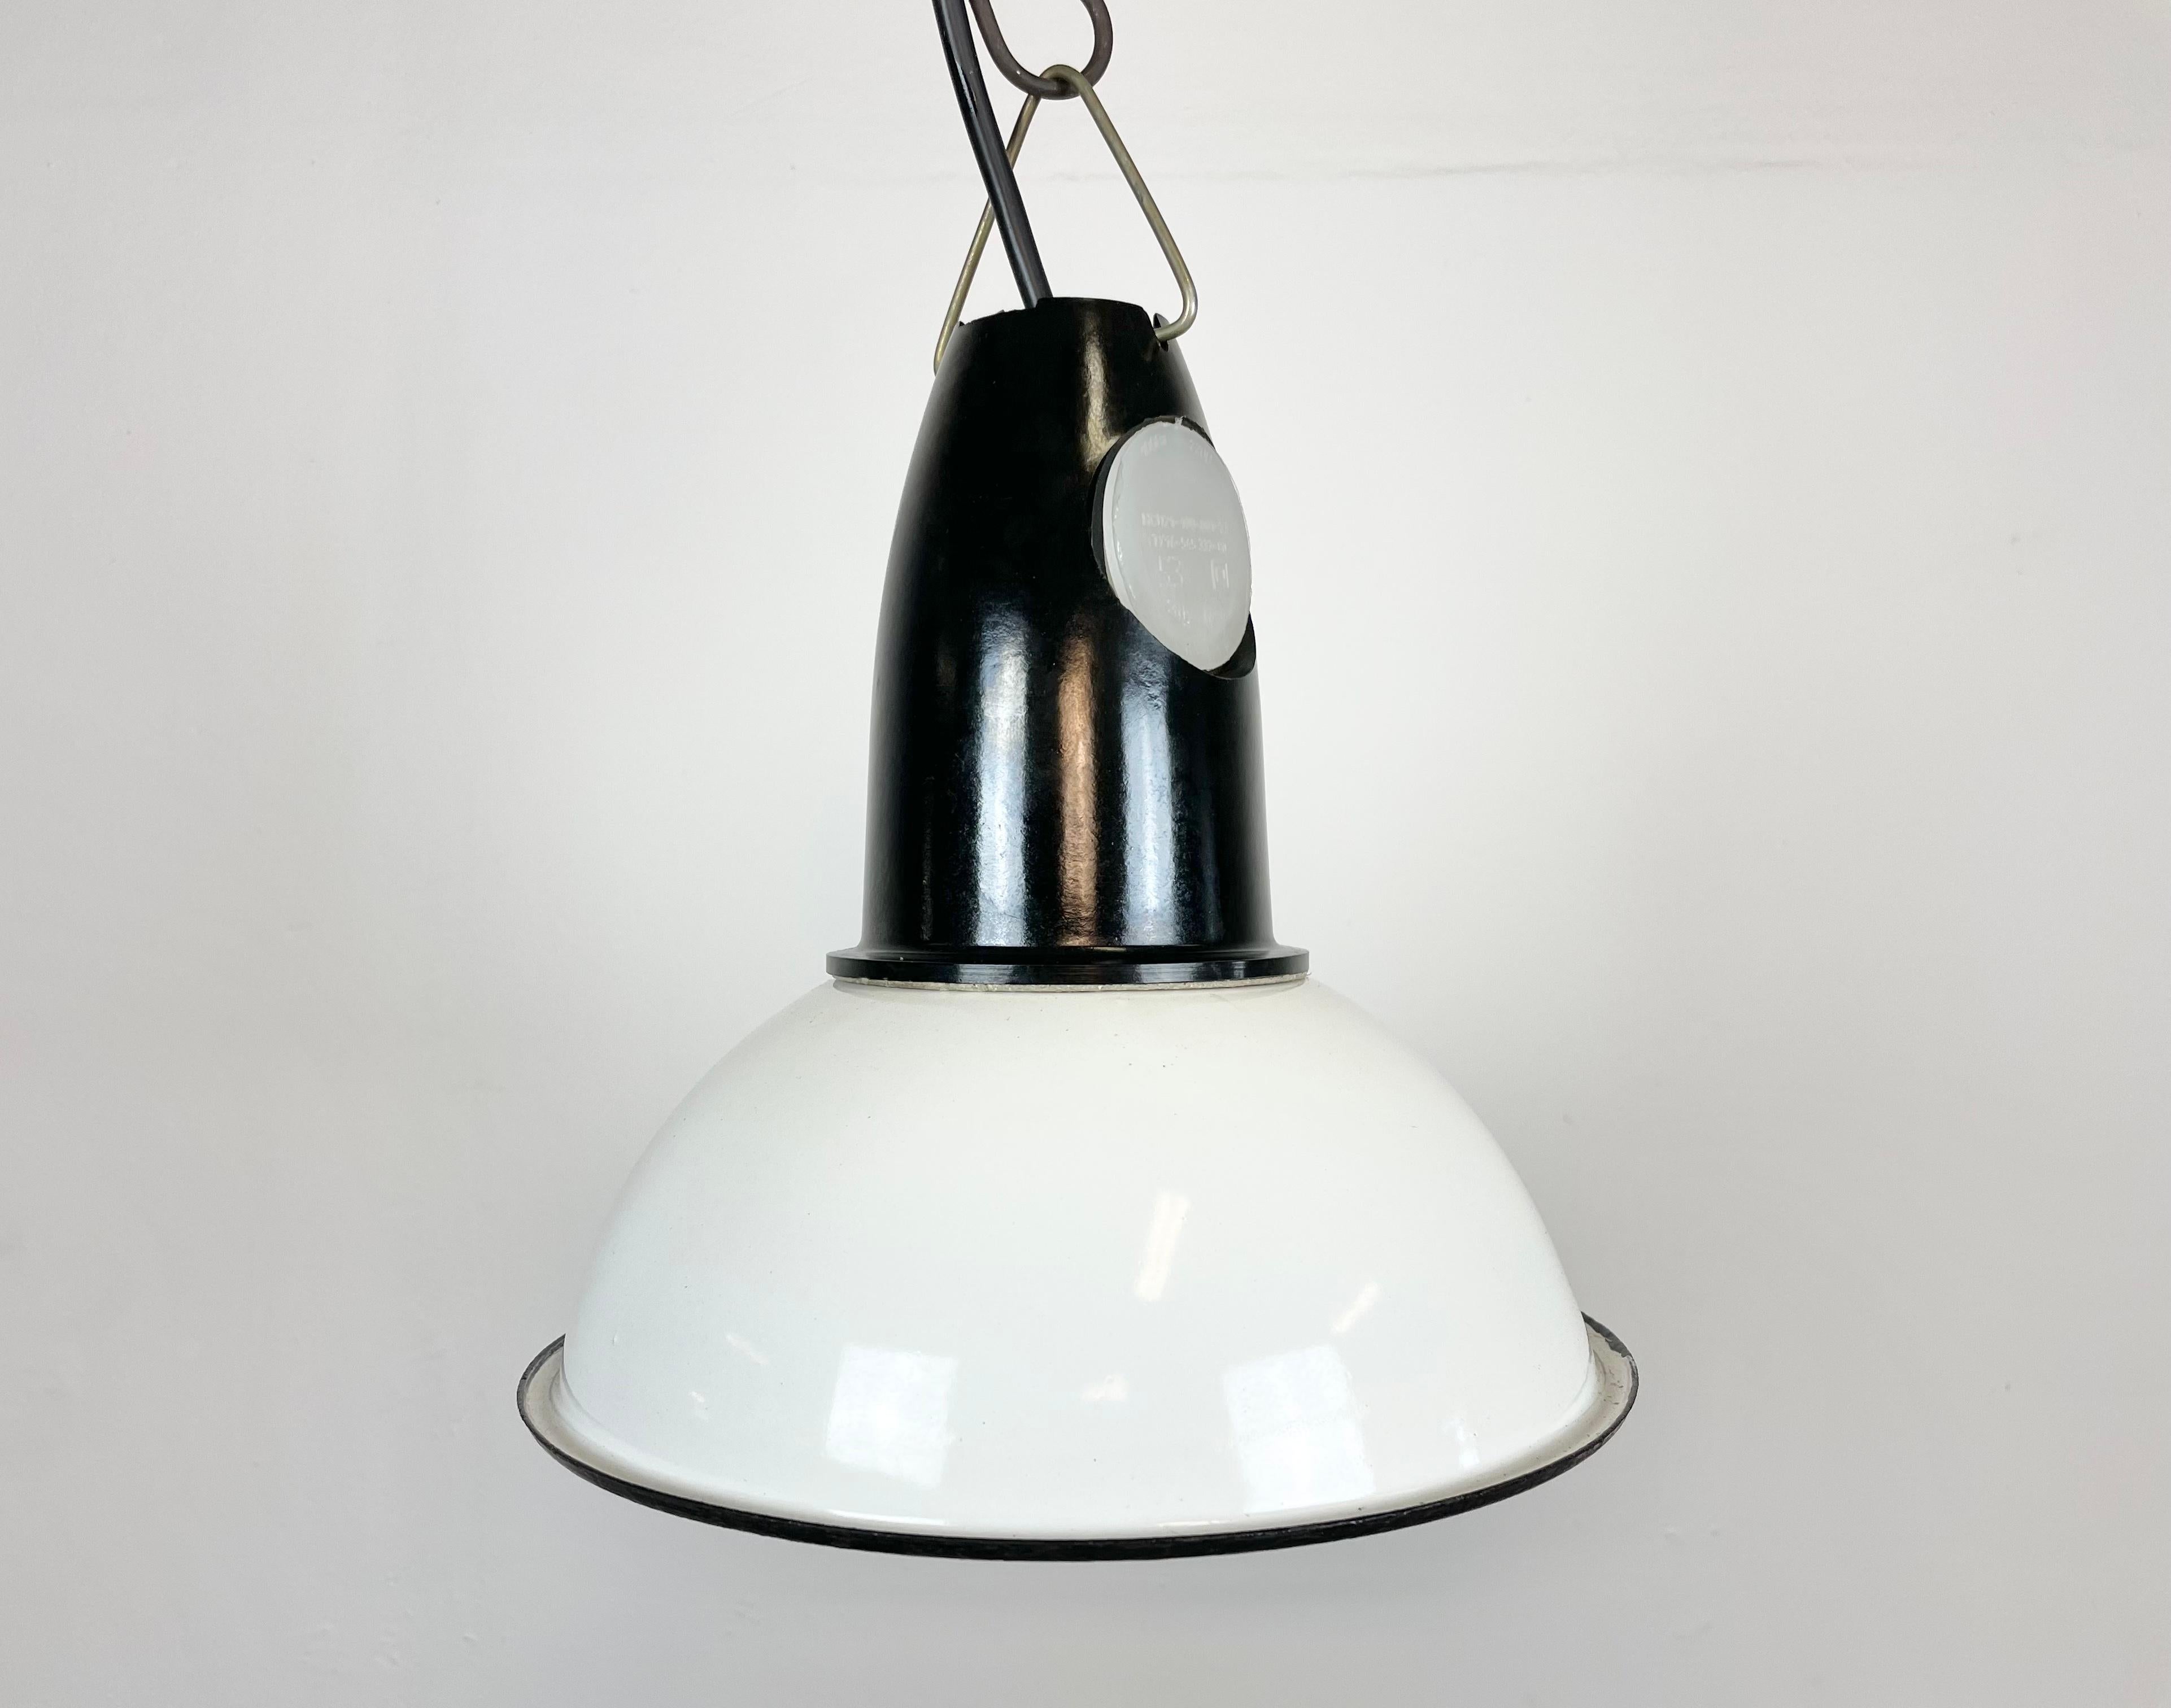 - Vintage Industrial lamp from the 1960s 
- Made in former Soviet Union
- White enamel shade
- Bakelite top 
- Socket requires E 27 light bulbs 
- New wire 
- Lampshade diameter: 22 cm
- Weight : 1 kg.